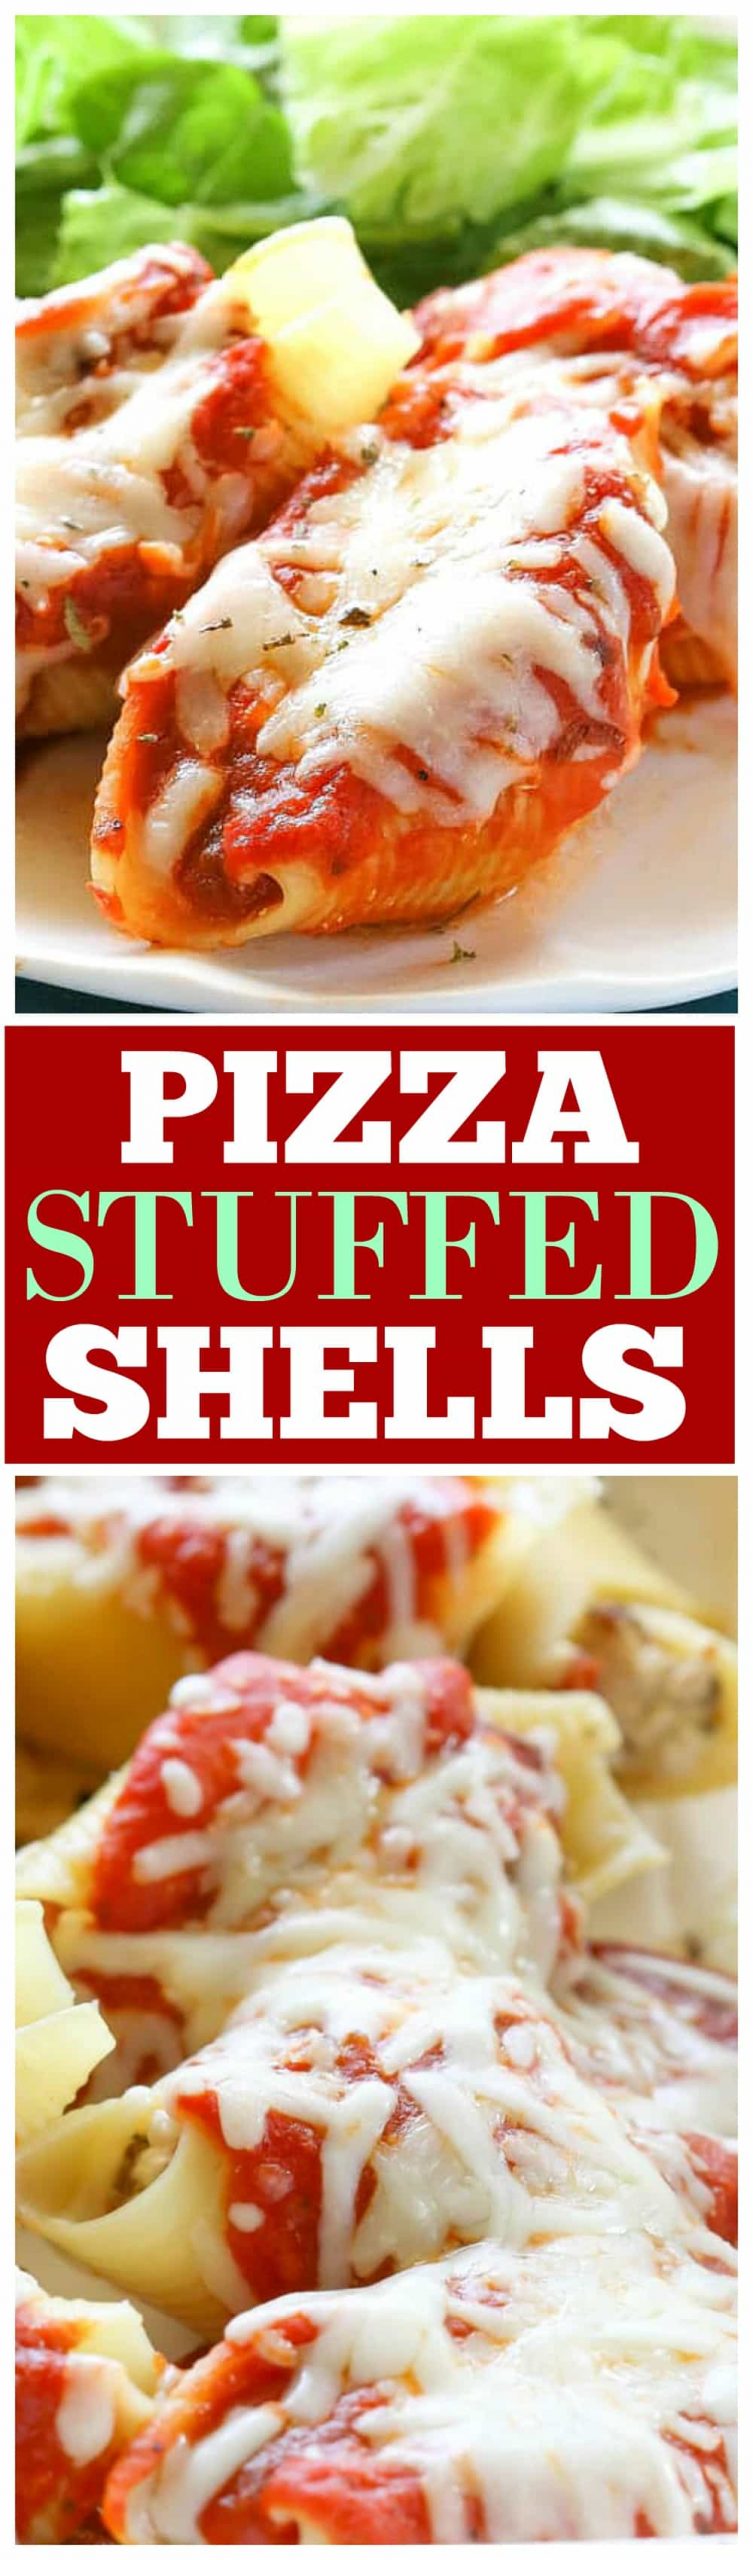 These Pizza Stuffed Shells are jumbo pasta shells stuffed with sausage, pepperoni, and cheese. Put your favorite toppings in! They can be made ahead and frozen for later. These are a total crowd pleaser. #pizza #stuffed #shells #recipe #italian #casseroles